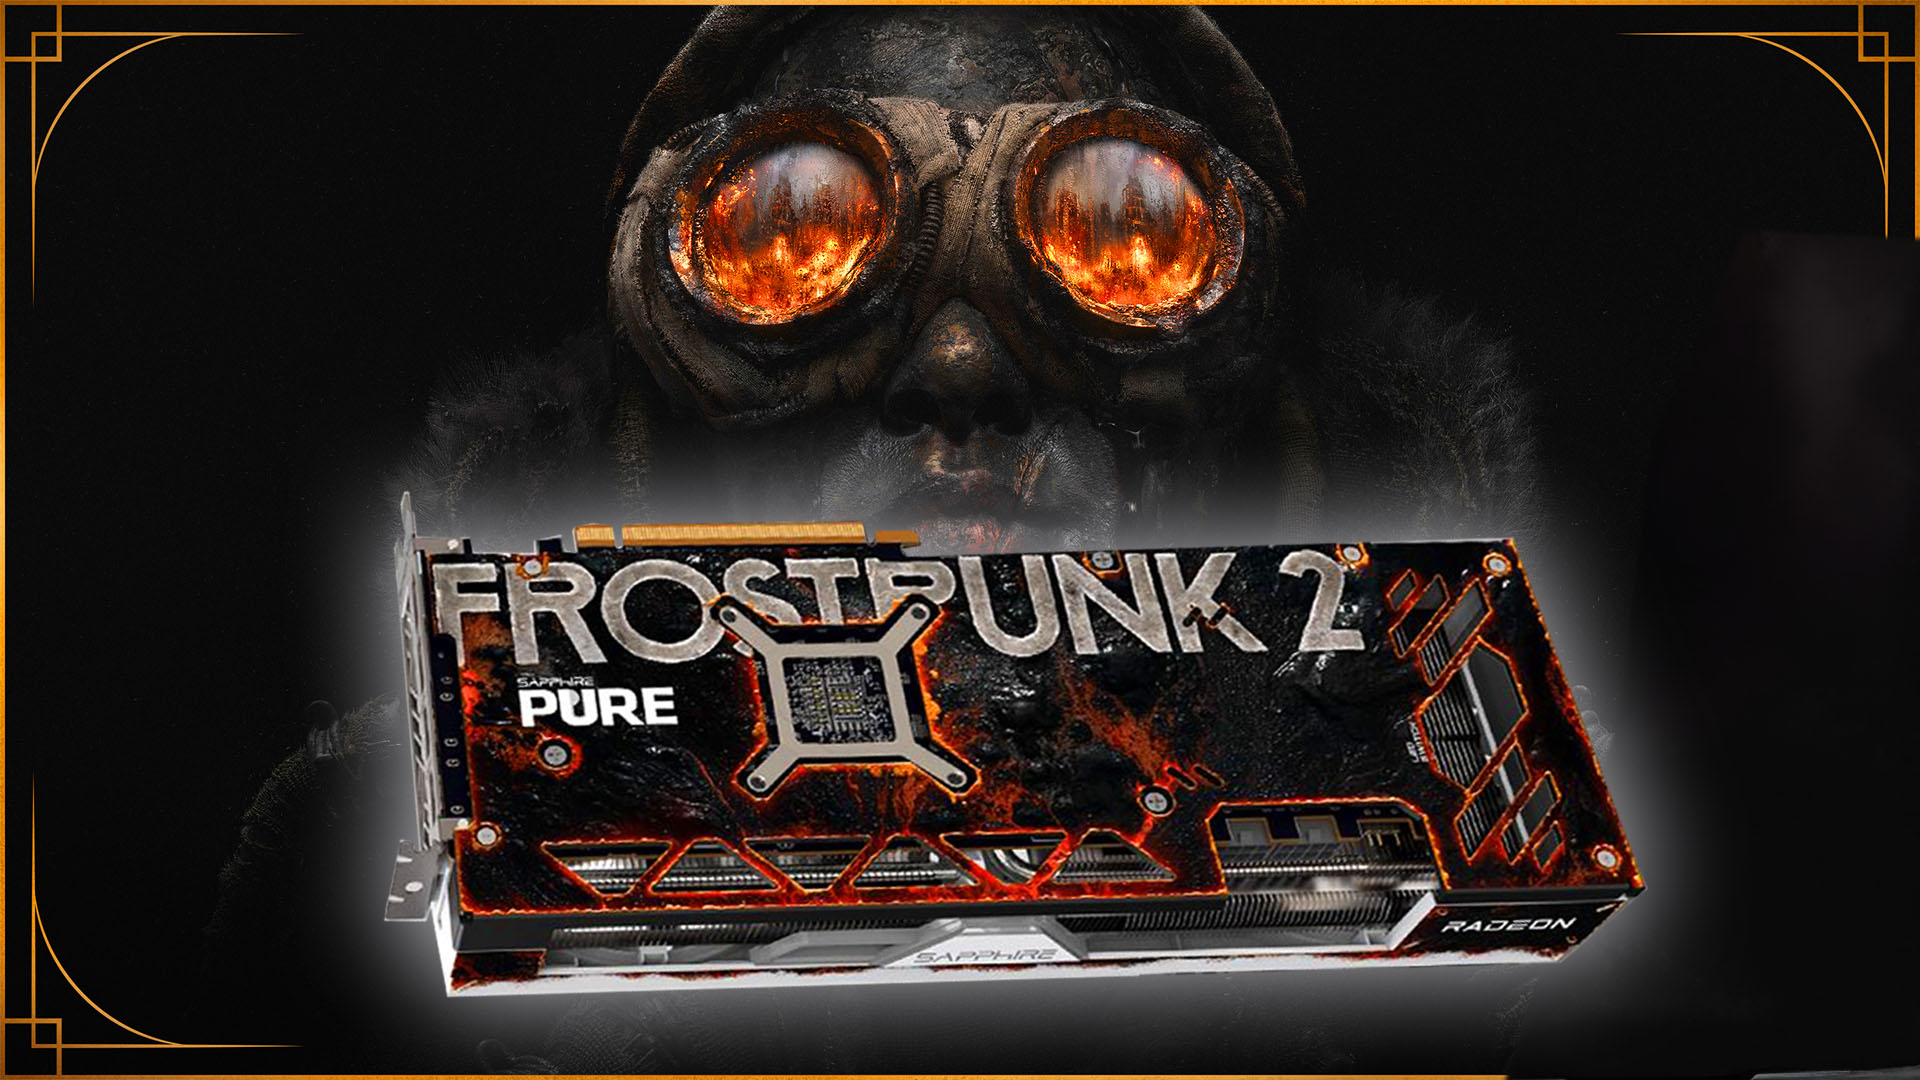 This is the graphics card you need to play Frostpunk 2